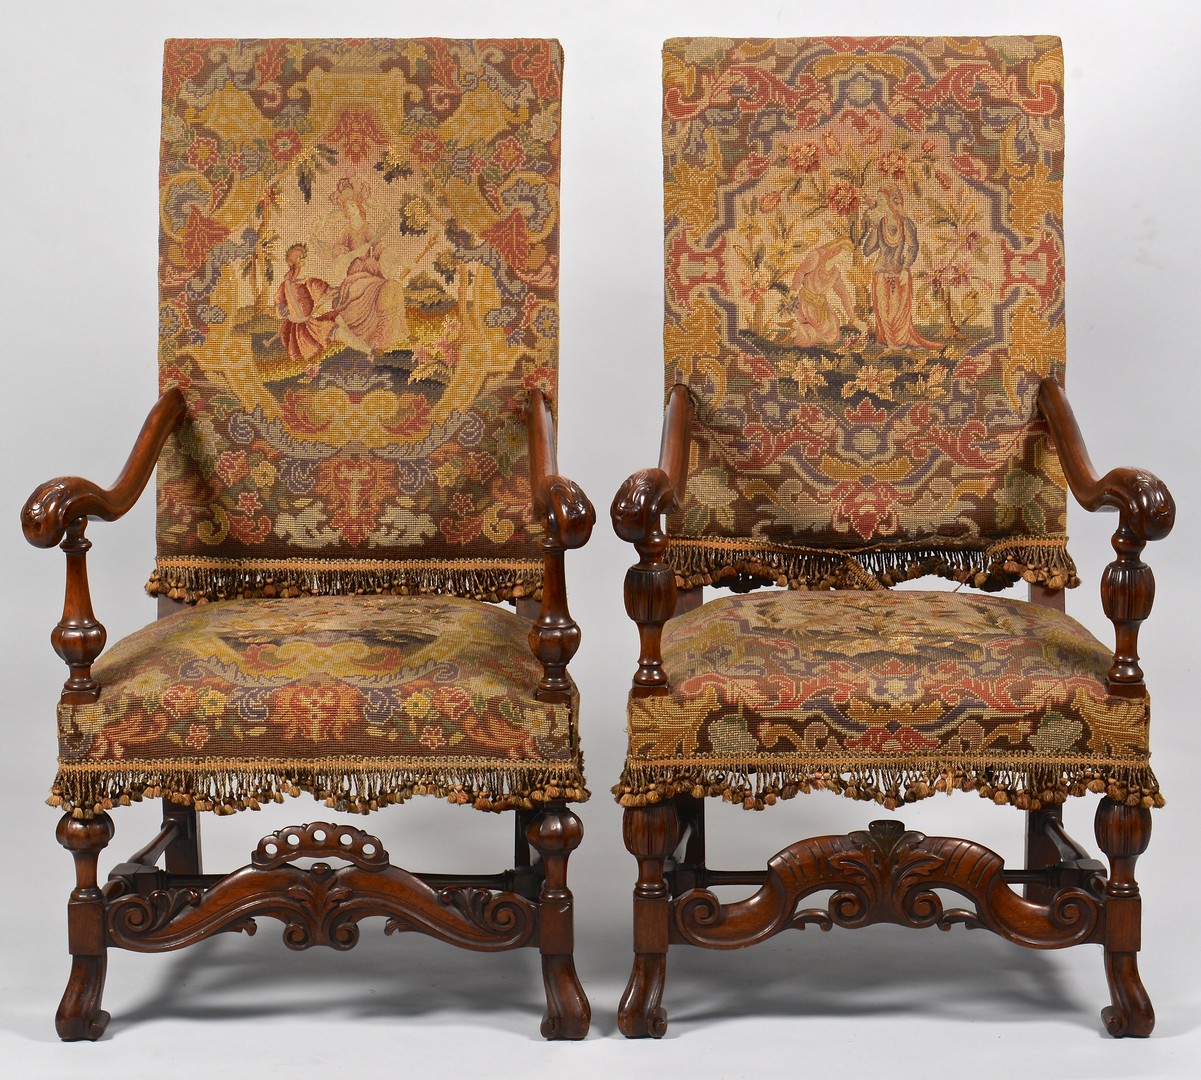 Lot 308: 2 Baroque Continental Needlepoint Chairs